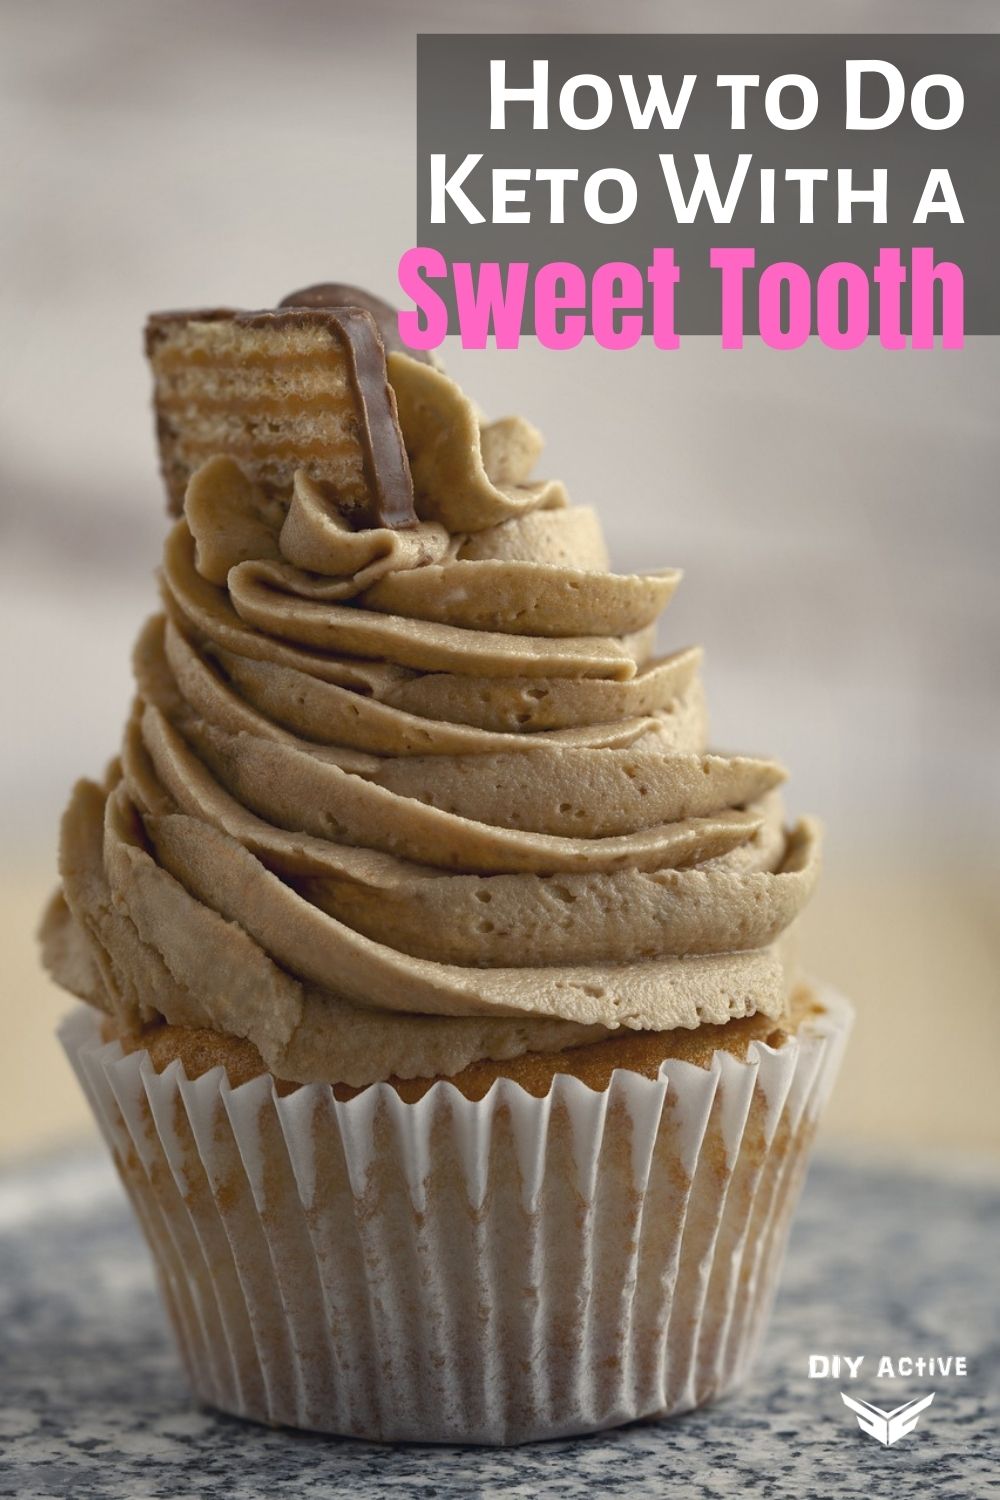 How to Do Keto With a Sweet Tooth